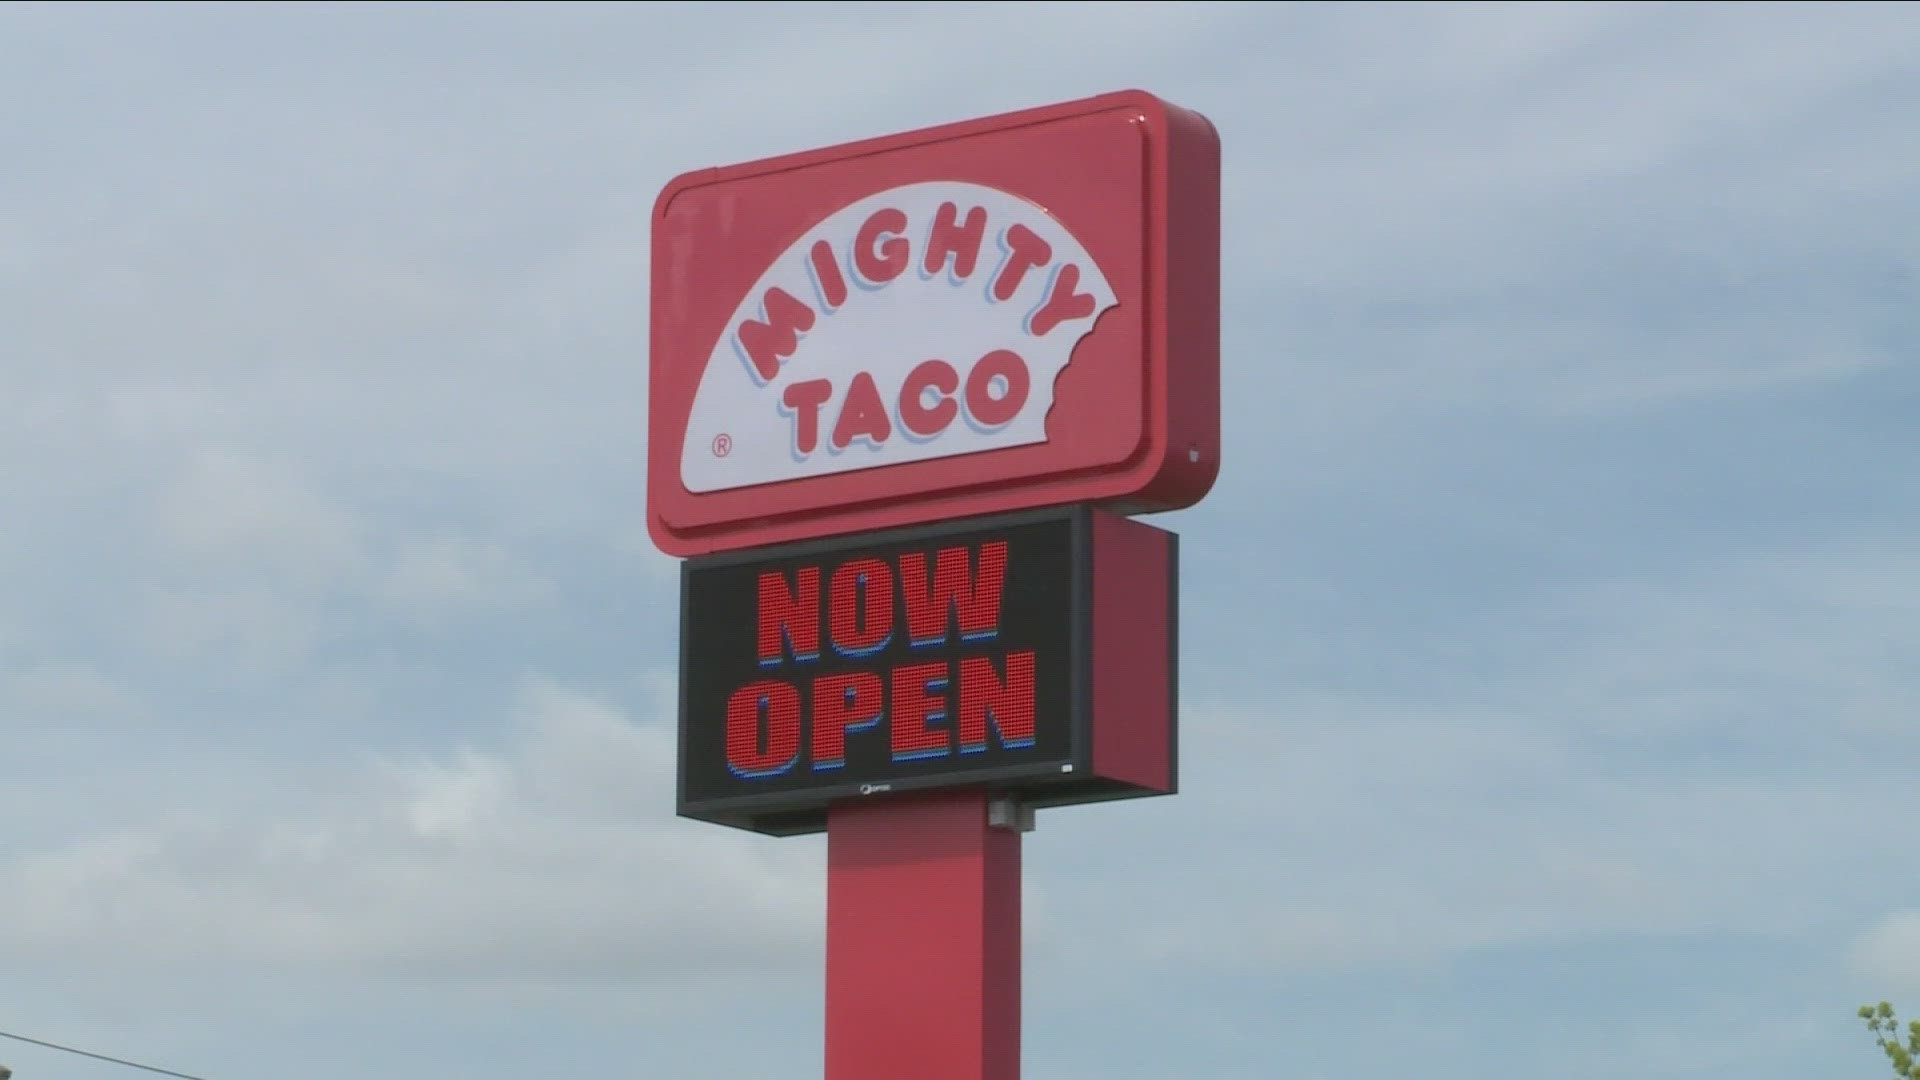 50% off at Mighty Taco Thursday, August 31st as they celebrate 50 years in WNY